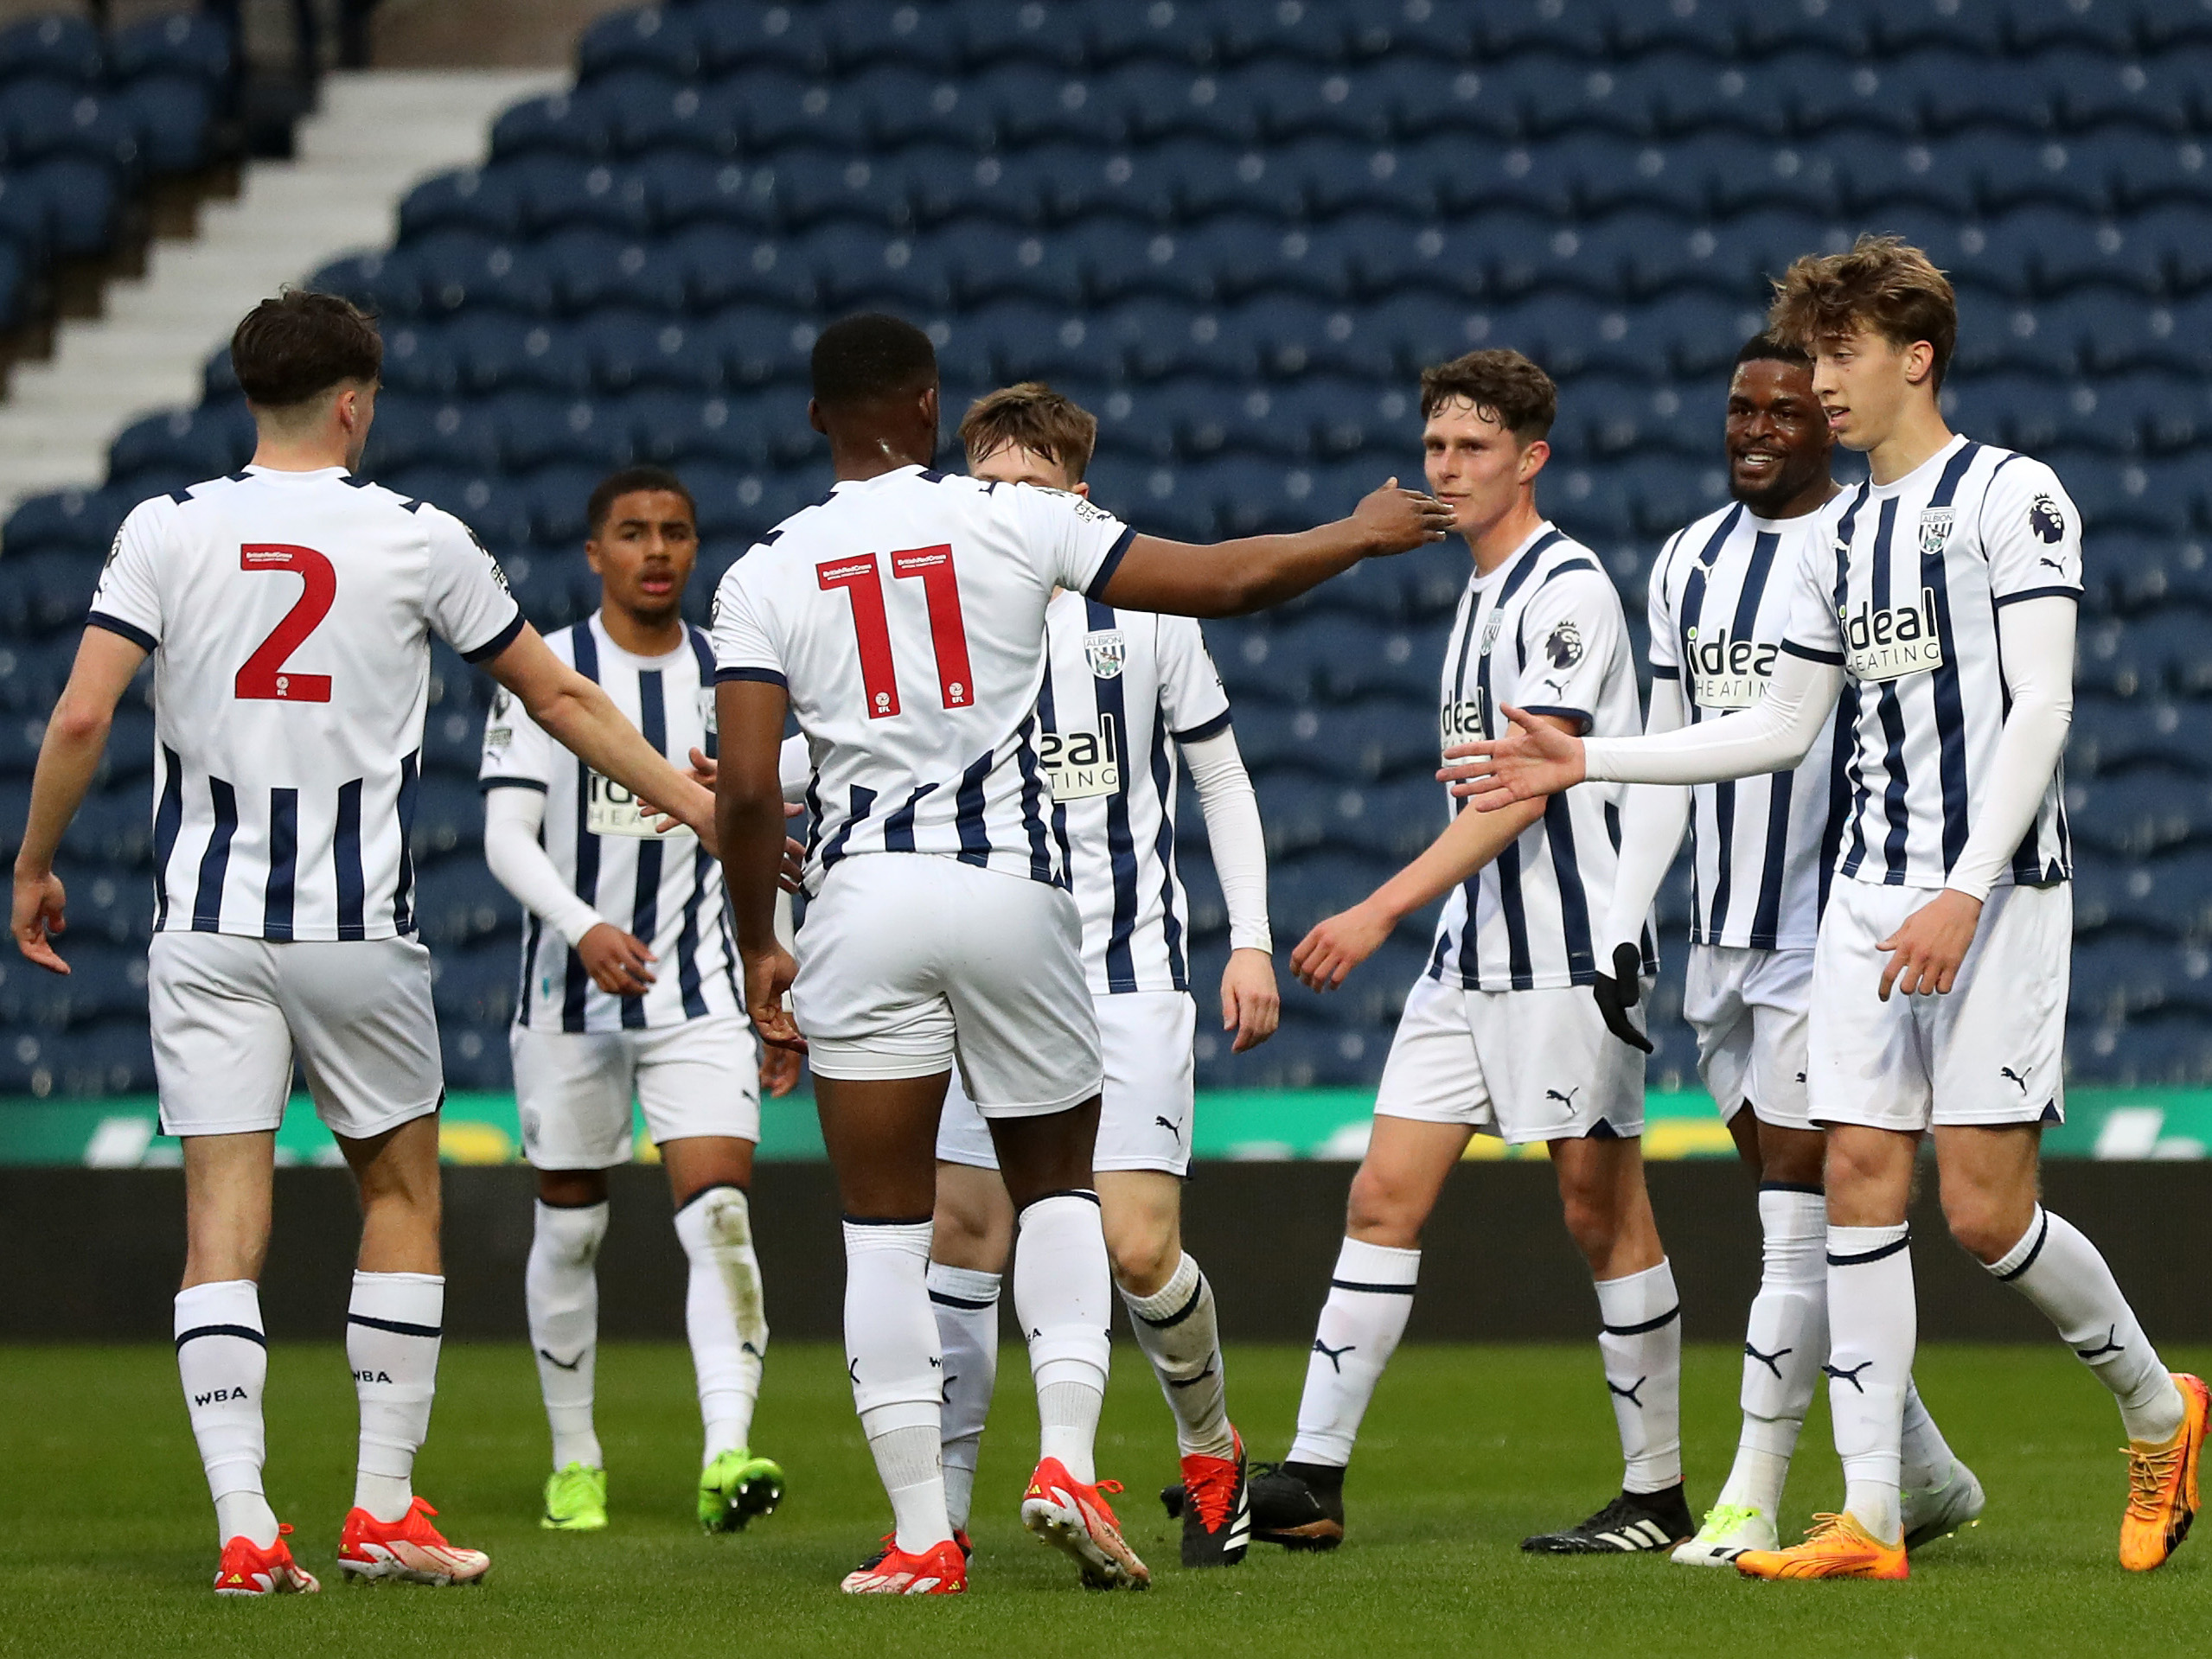 Albion's PL2 players celebrate a goal after scoring against Leeds United at The Hawthorns wearing the home kit